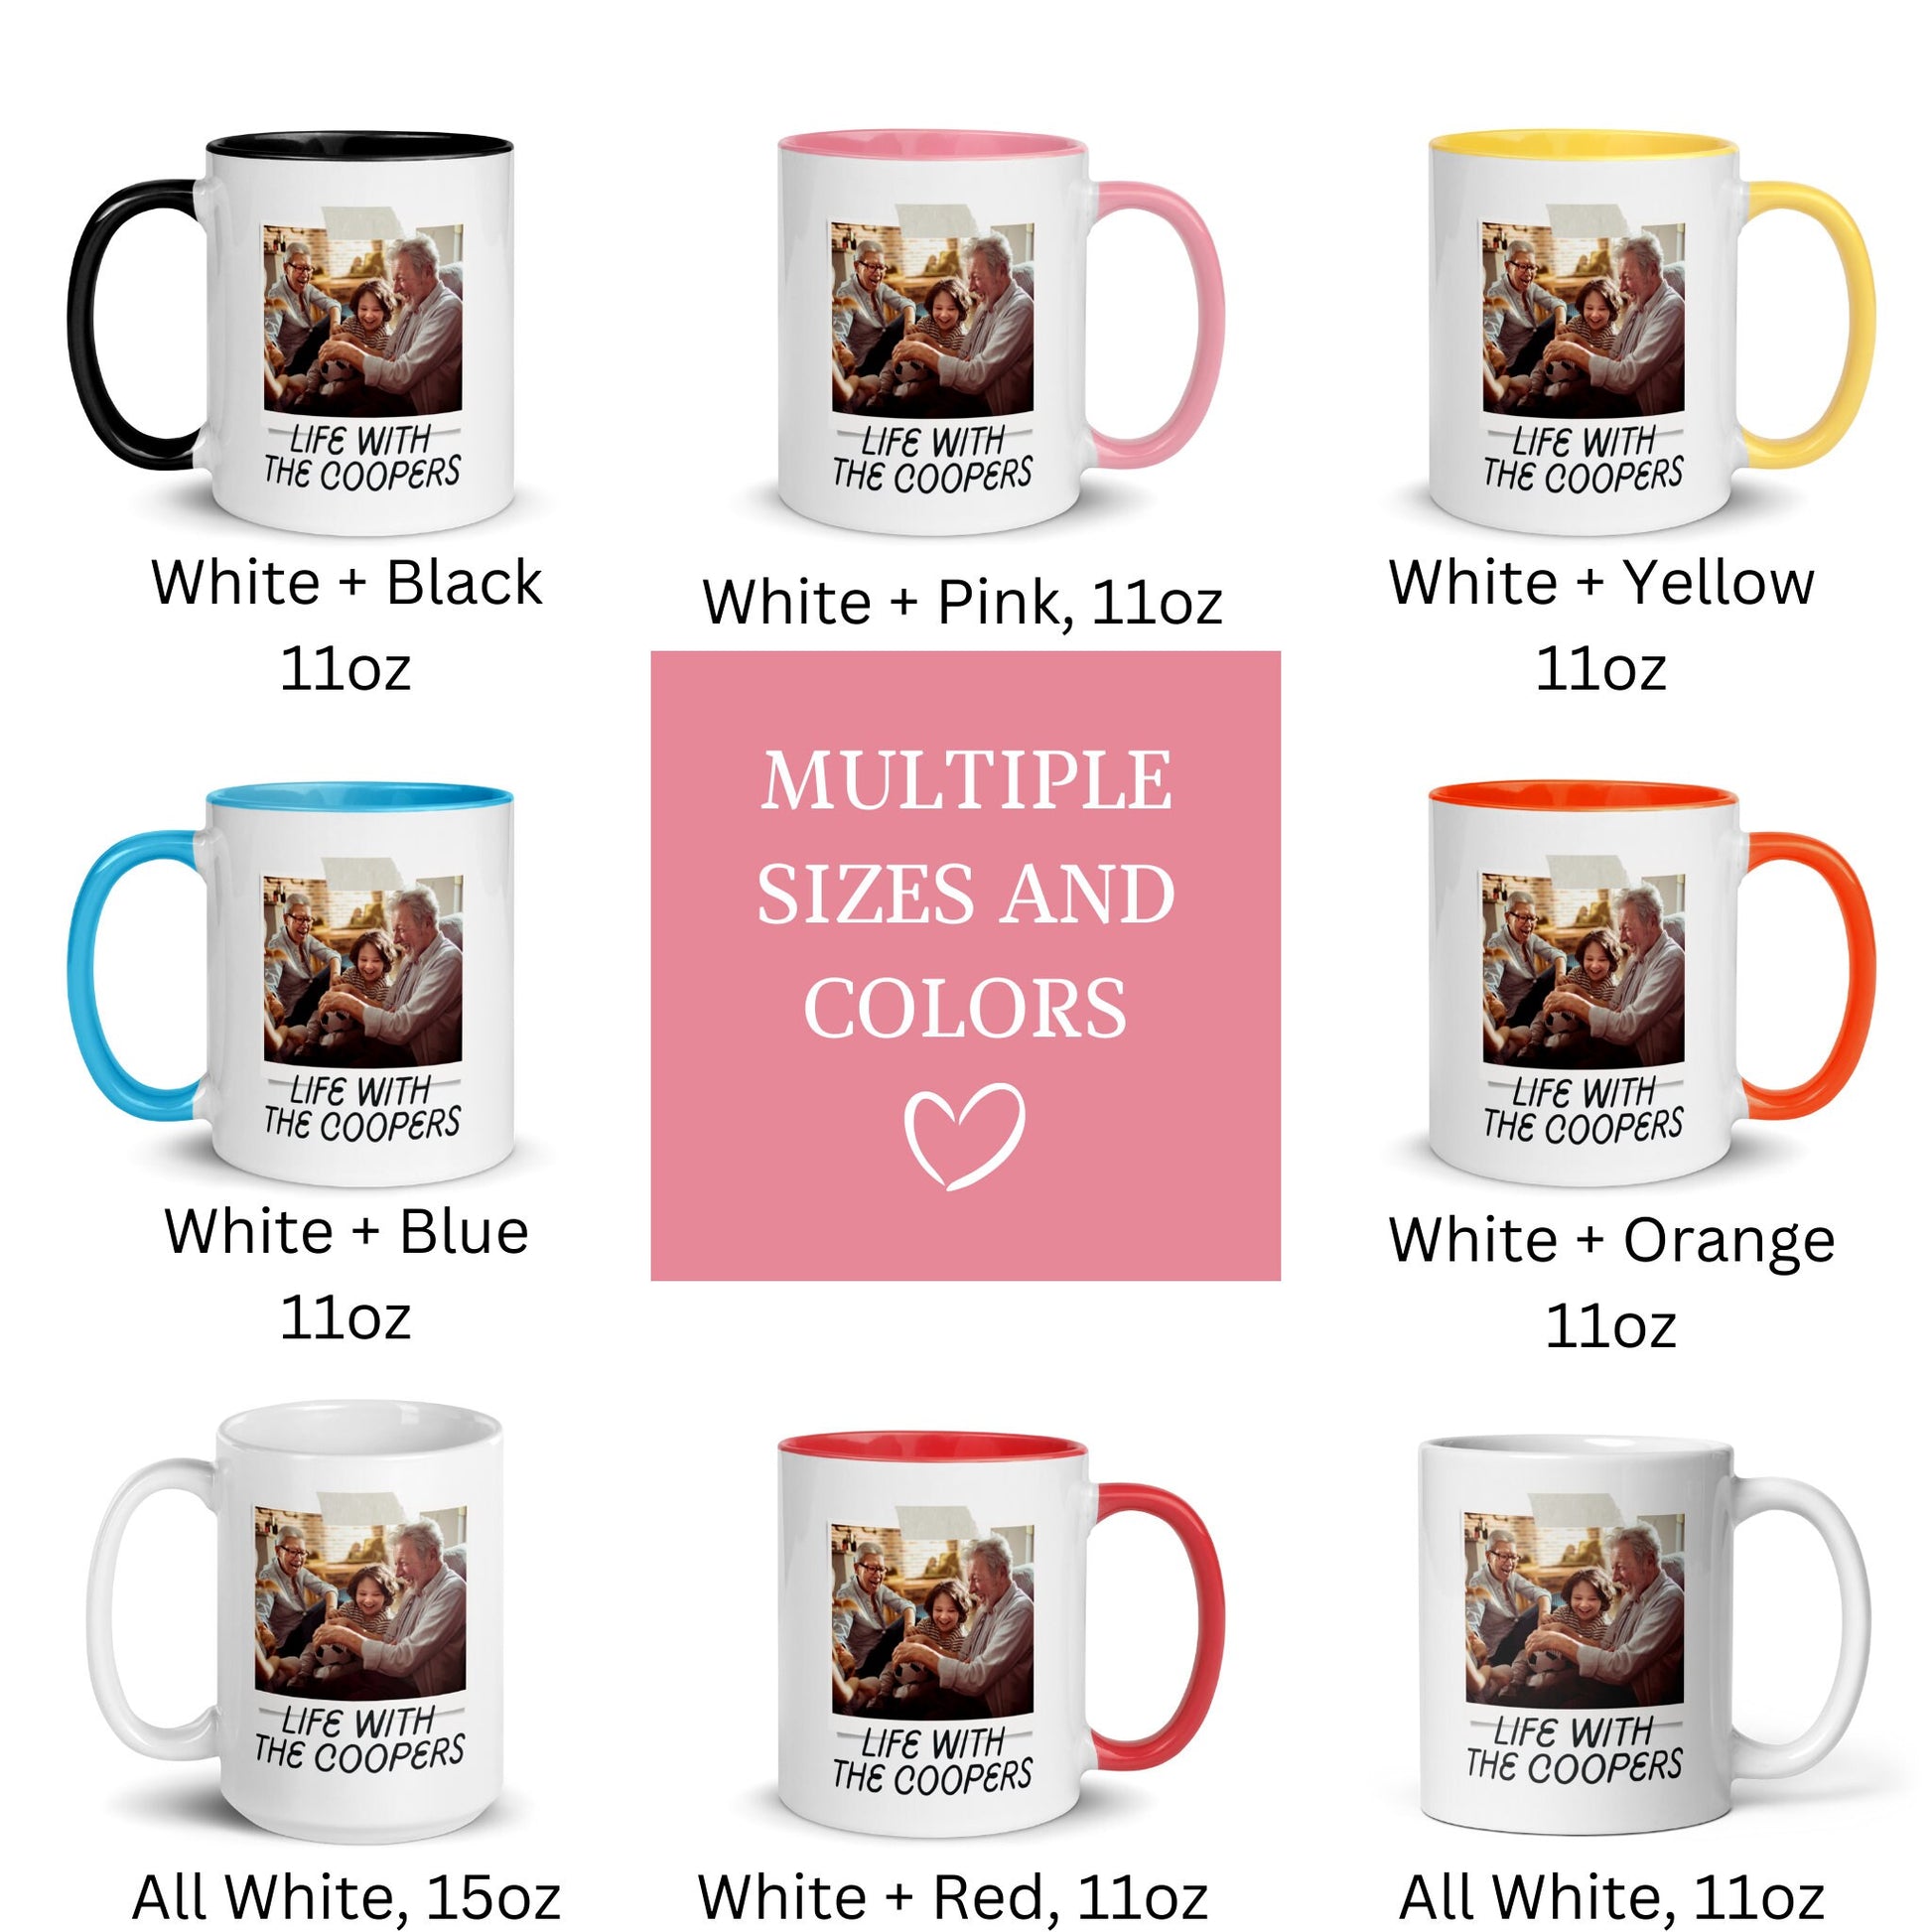 Meet the Family Personalized Picture Mug, Custom Photo Coffee Cup, Birthday Gift for Dad Mom, Family Gift for Her Him, Ceramic Mug, 009